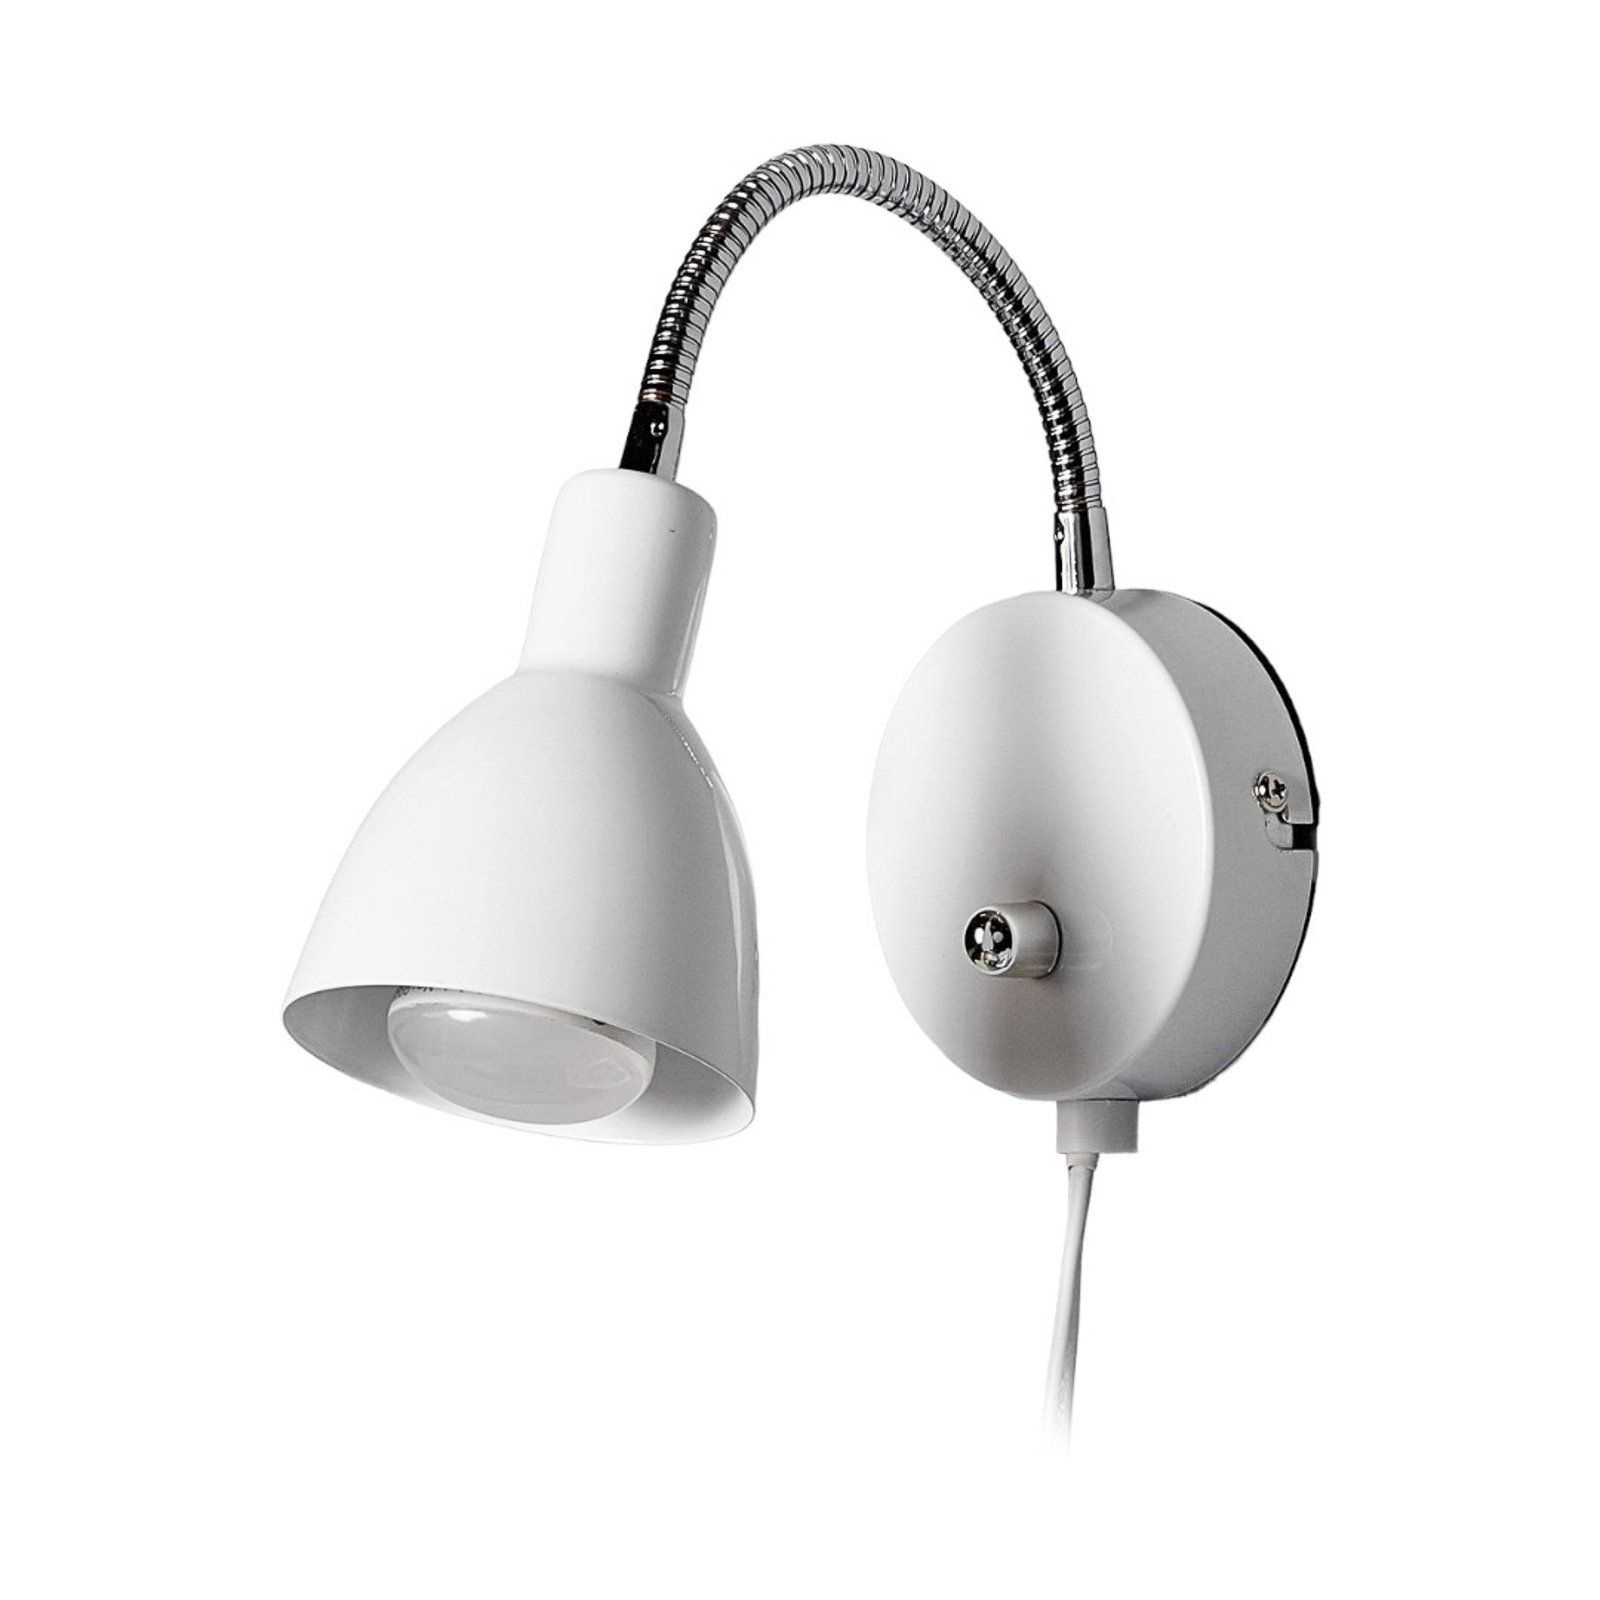 Lindby Amrei applique, dimmable, blanche